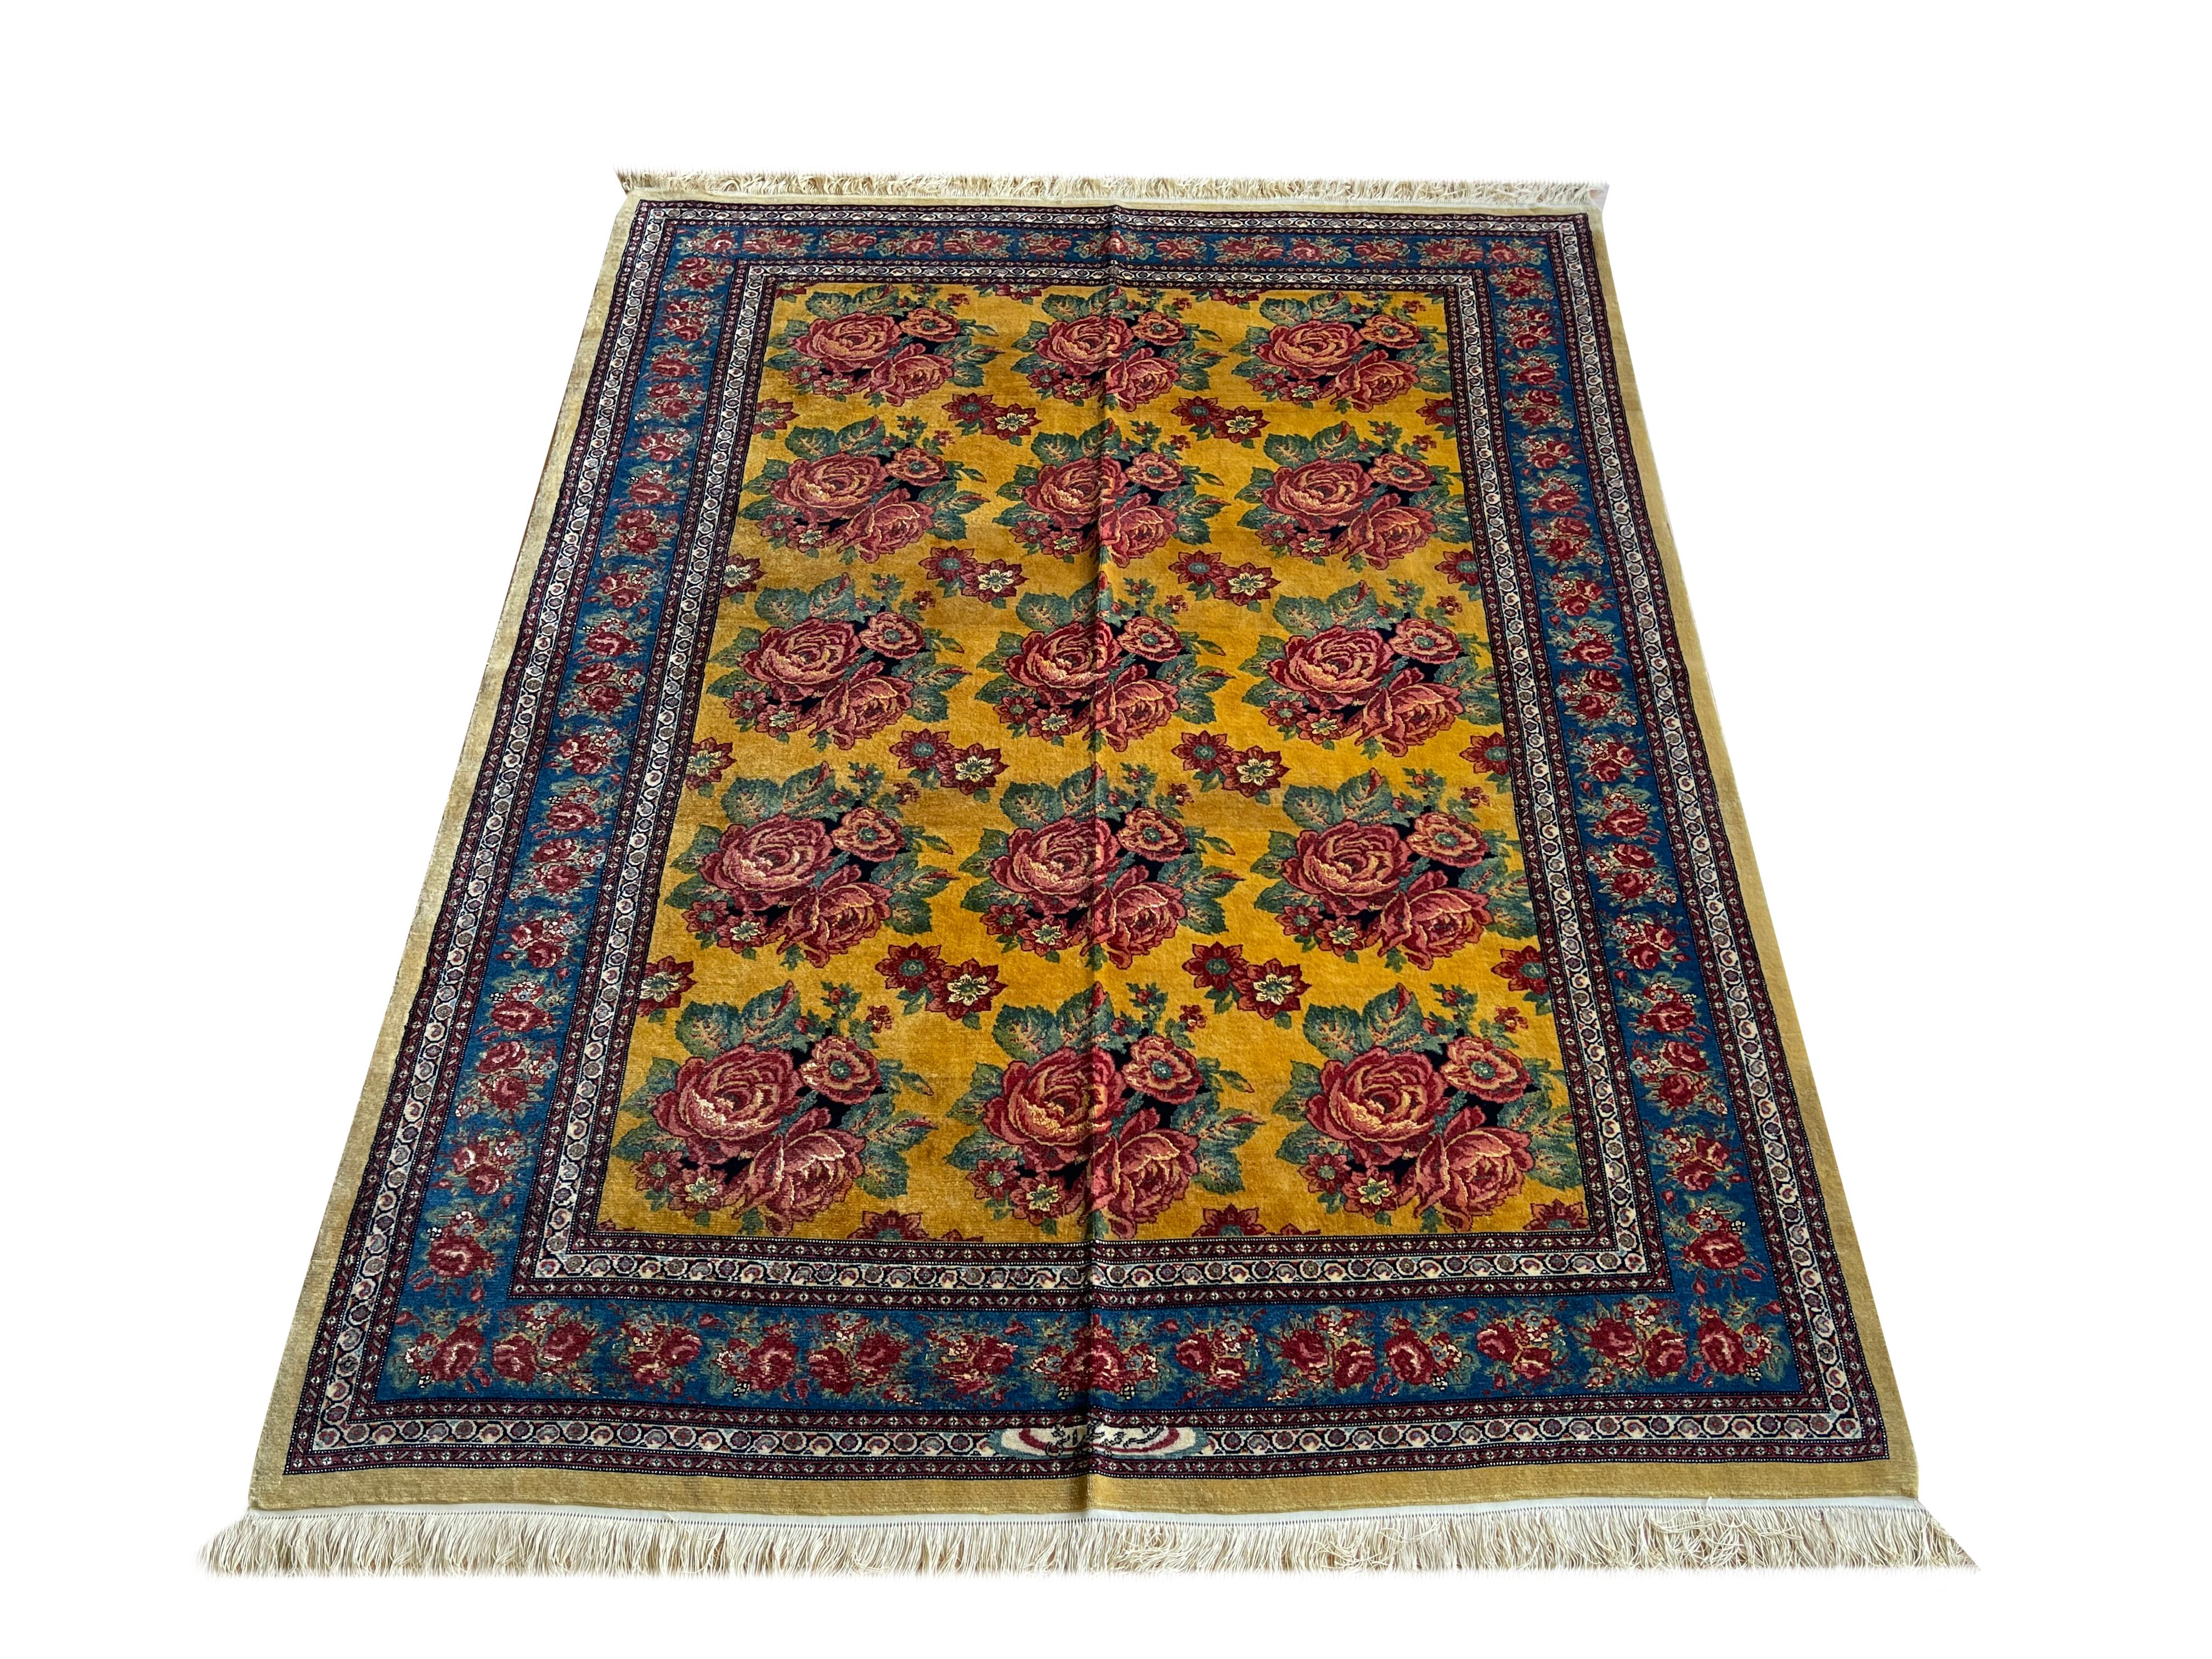 Exclusive magnificent handmade rug made of high-quality materials and design from a very high-end rug workshop.
The background of this floral rug shows this glittery gold rug as very vivid and shiny. 
The design of this rug includes a naturally